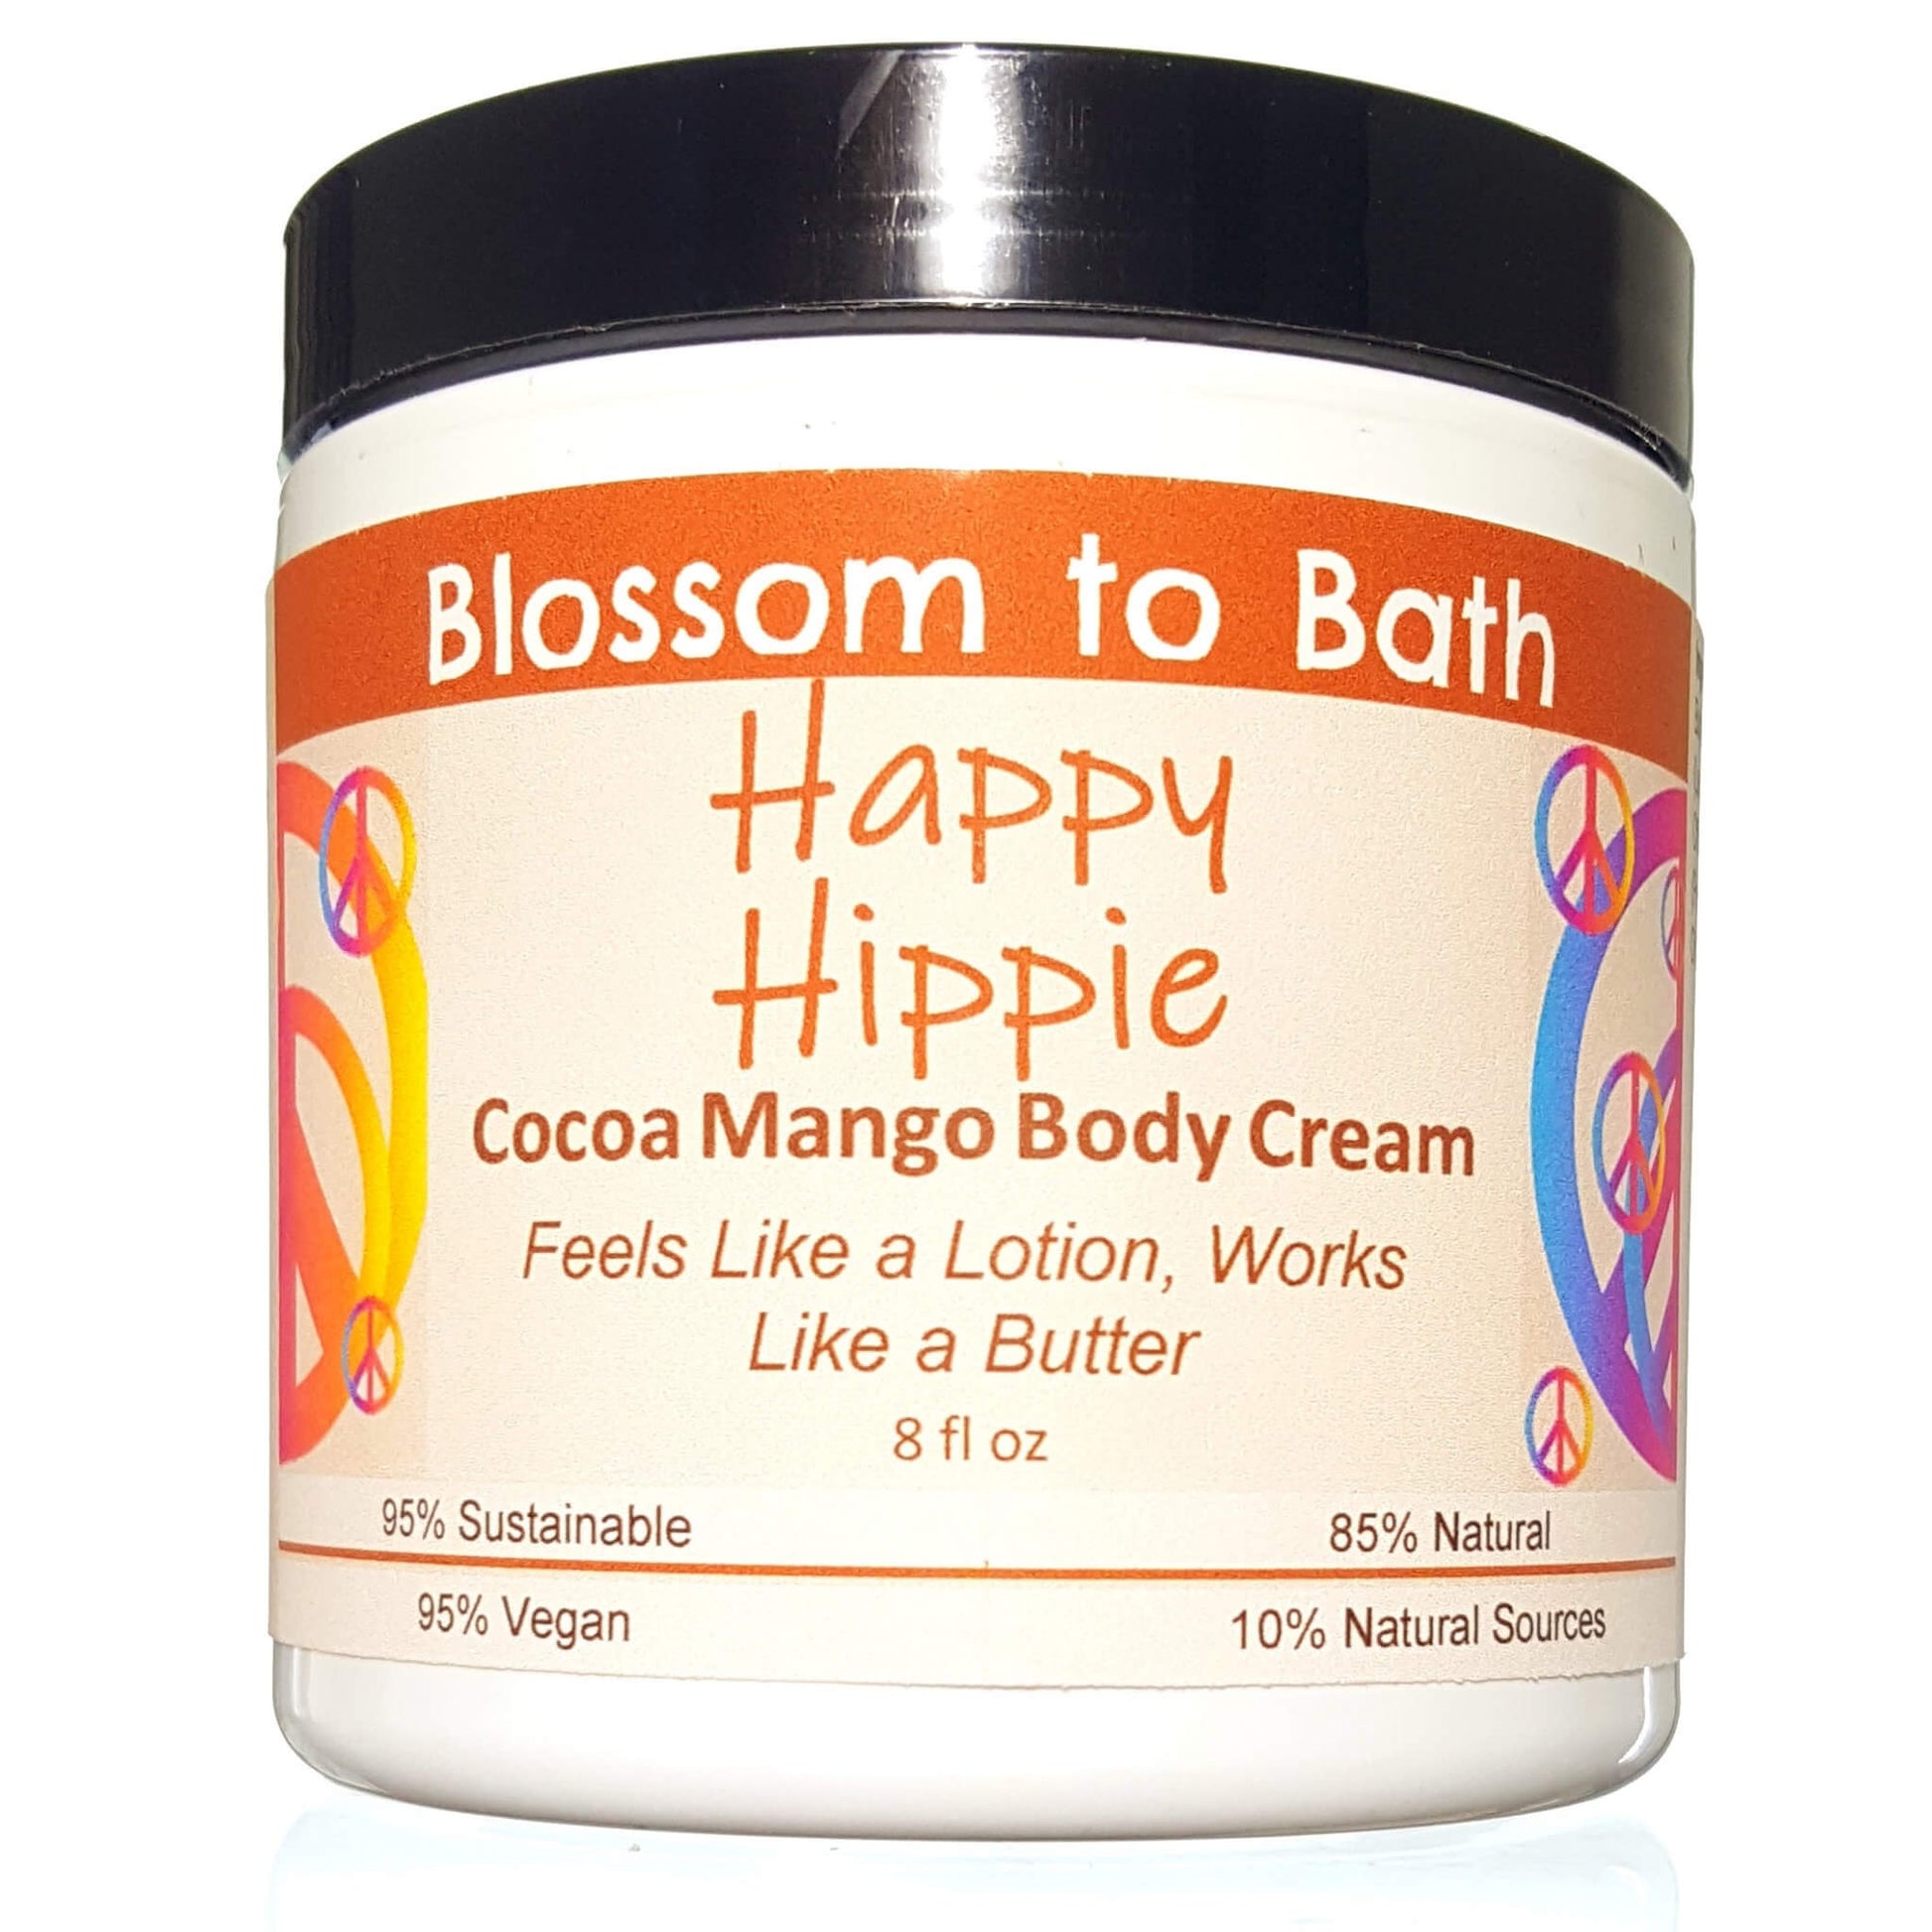 Buy Blossom to Bath Happy Hippie Cocoa Mango Body Cream from Flowersong Soap Studio.  Rich organic butters luxury soften and moisturize even the roughest skin all day  A refreshing herbal fragrance that elevates your mood and your perspective.